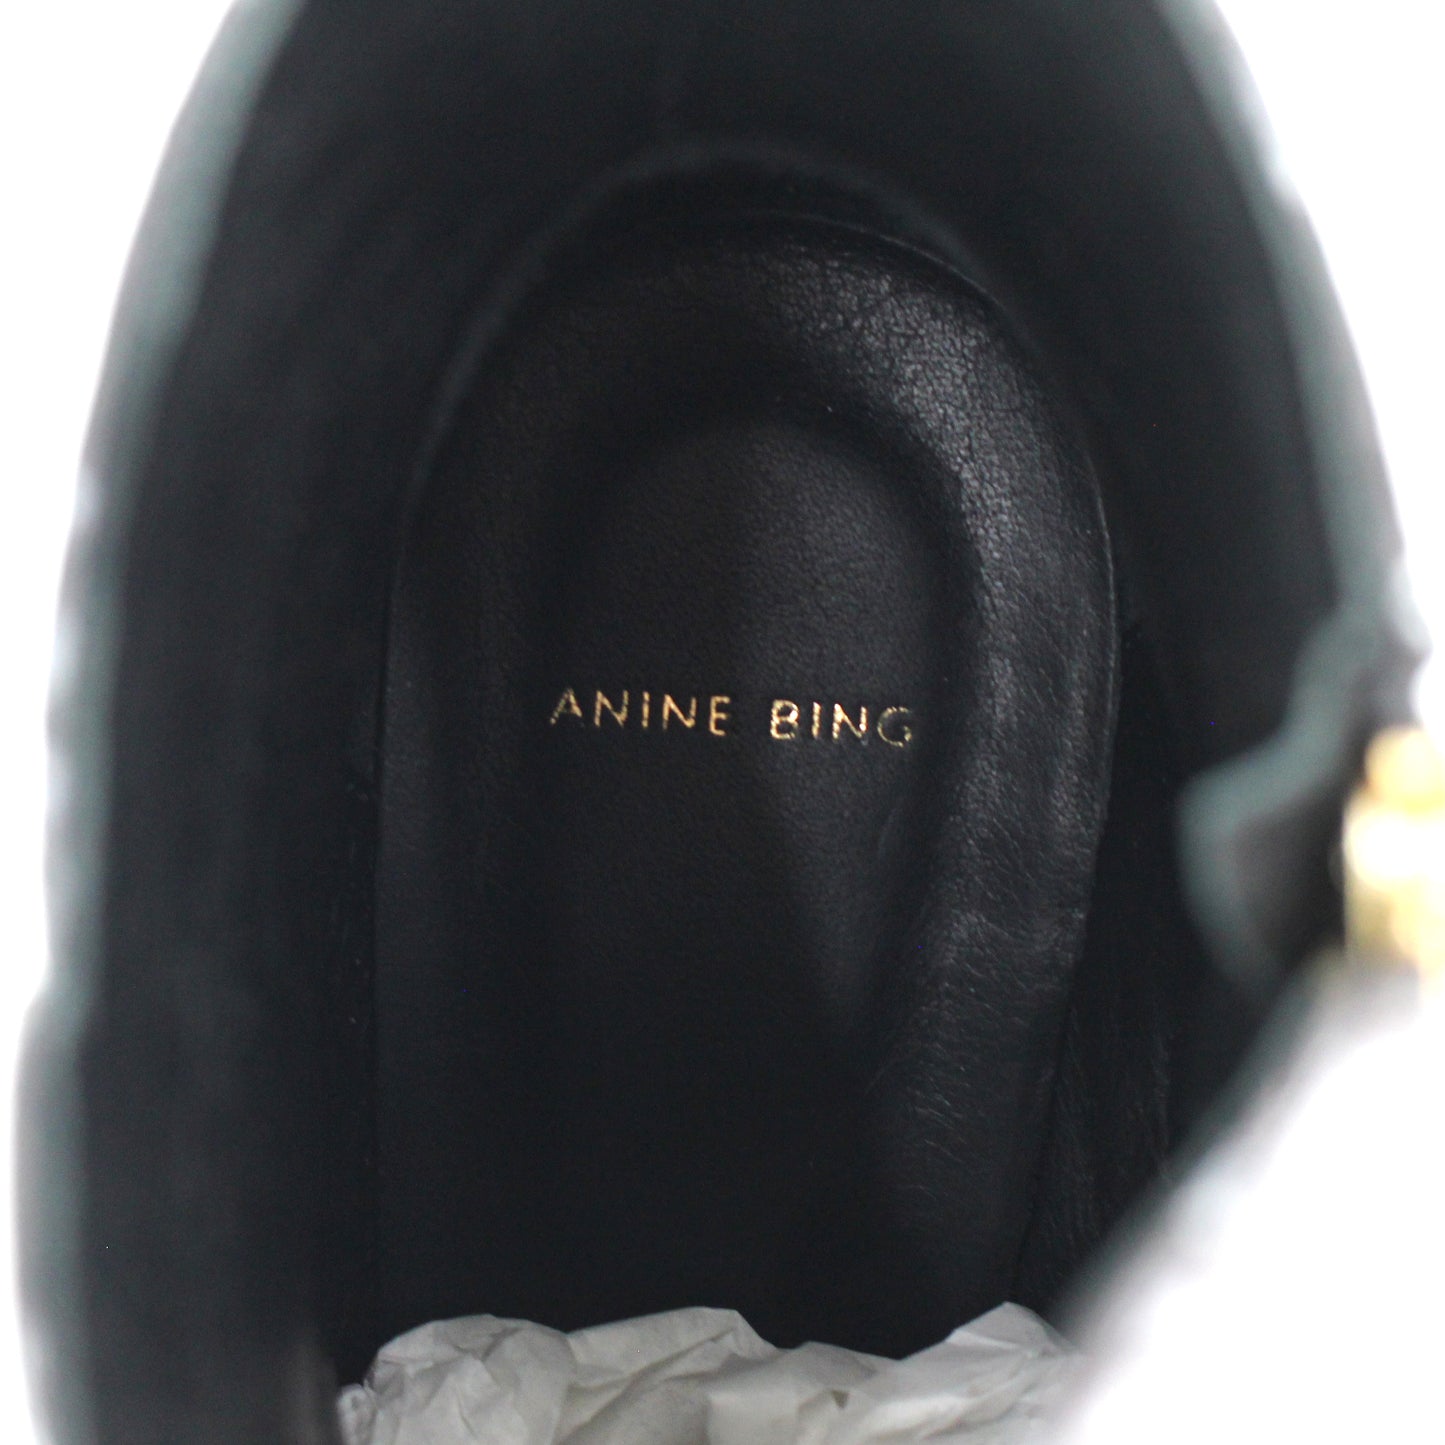 Anine Bing Ava Cloudy Ankle Bootie